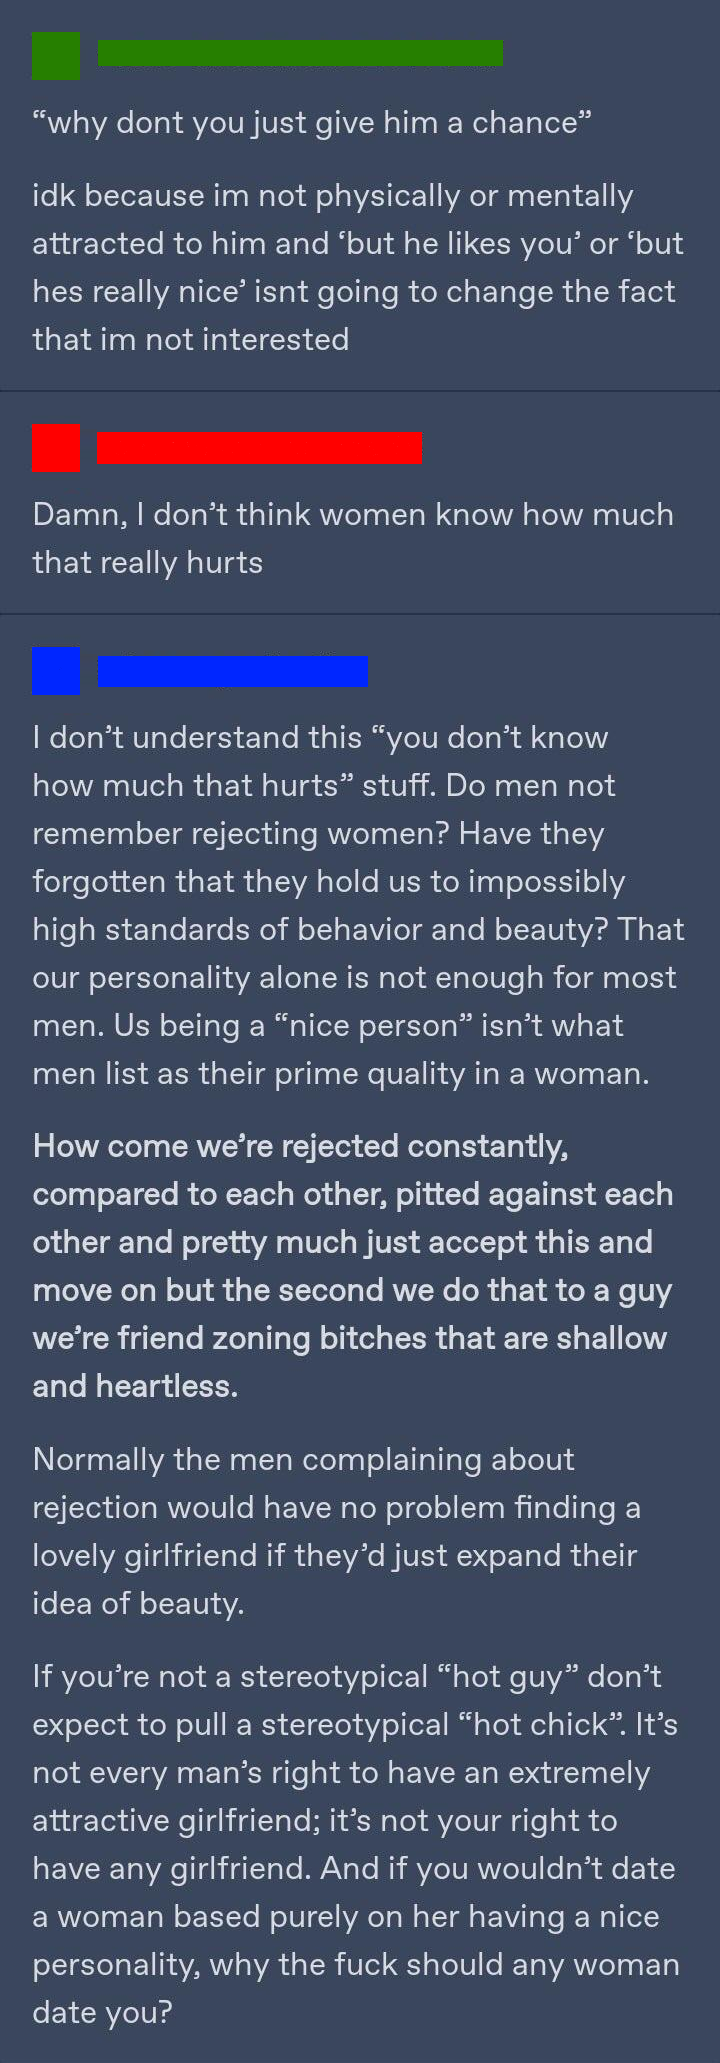 screenshot - "why dont you just give him a chance idk because Im not physically or mentally attracted to him and but he you or but has really nice isnt going to change the fact that im not interested Damn, I don't think women know how much that really hur